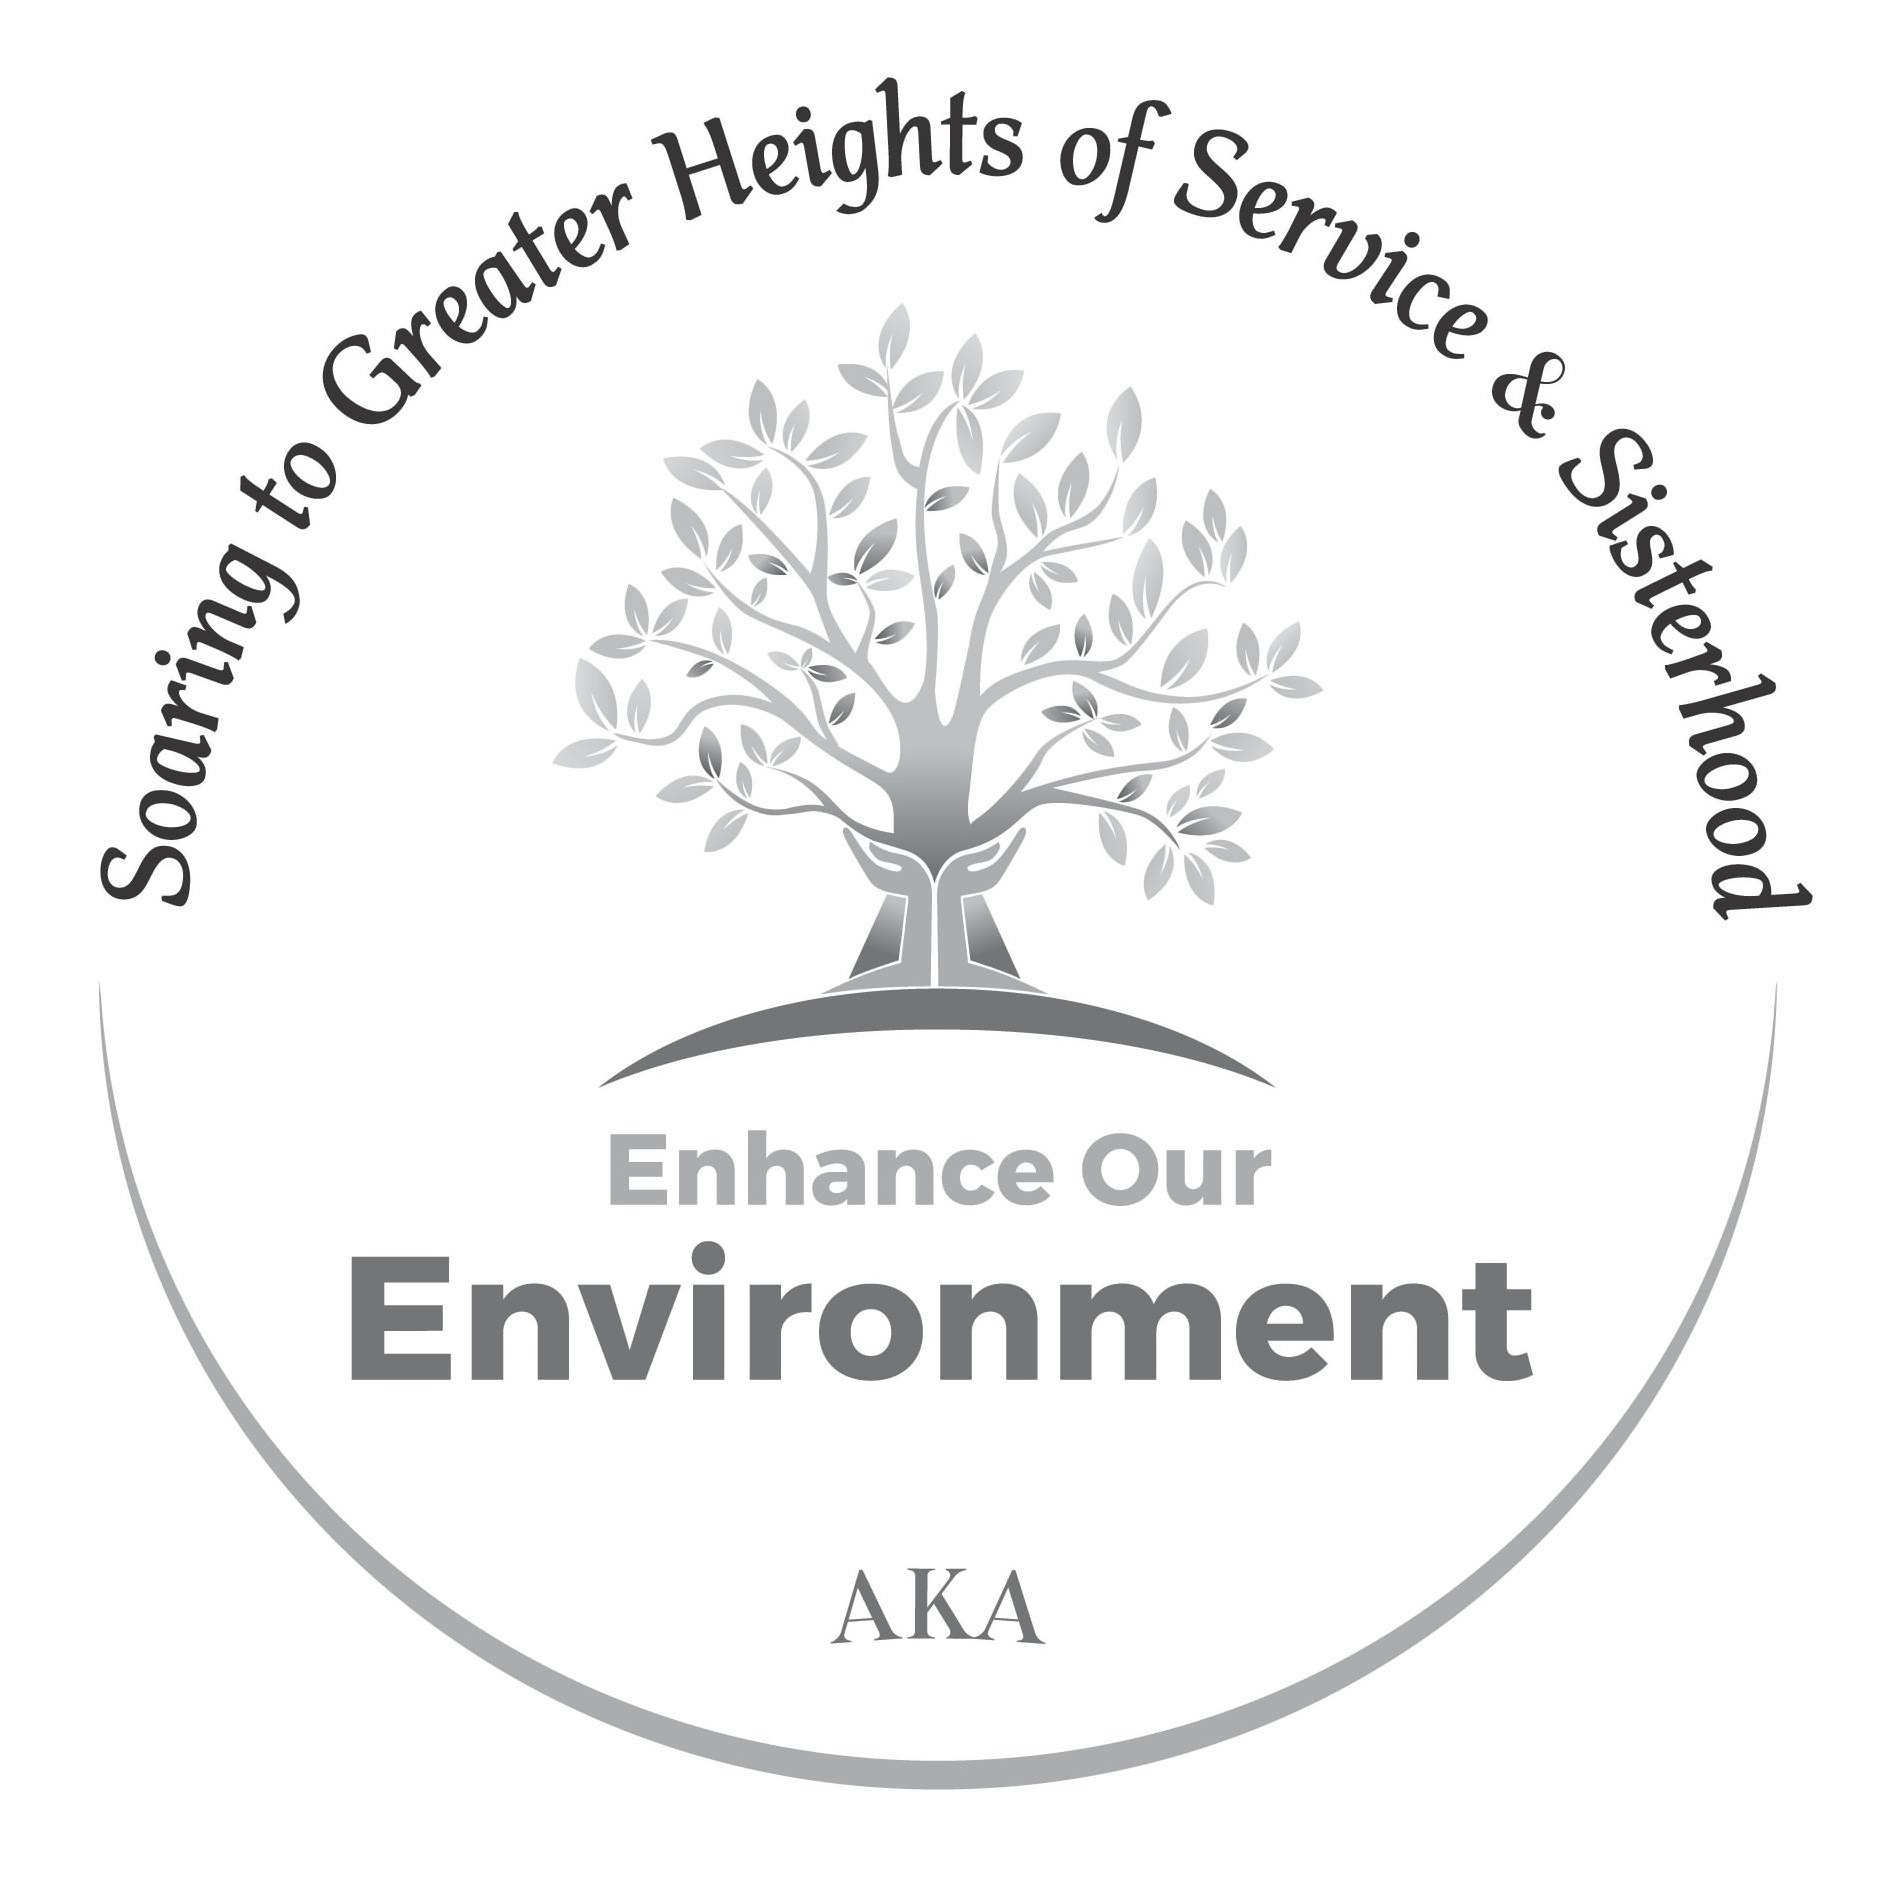  SOARING TO GREATER HEIGHTS OF SERVICE &amp; SISTERHOOD ENHANCE OUR ENVIRONMENT AKA